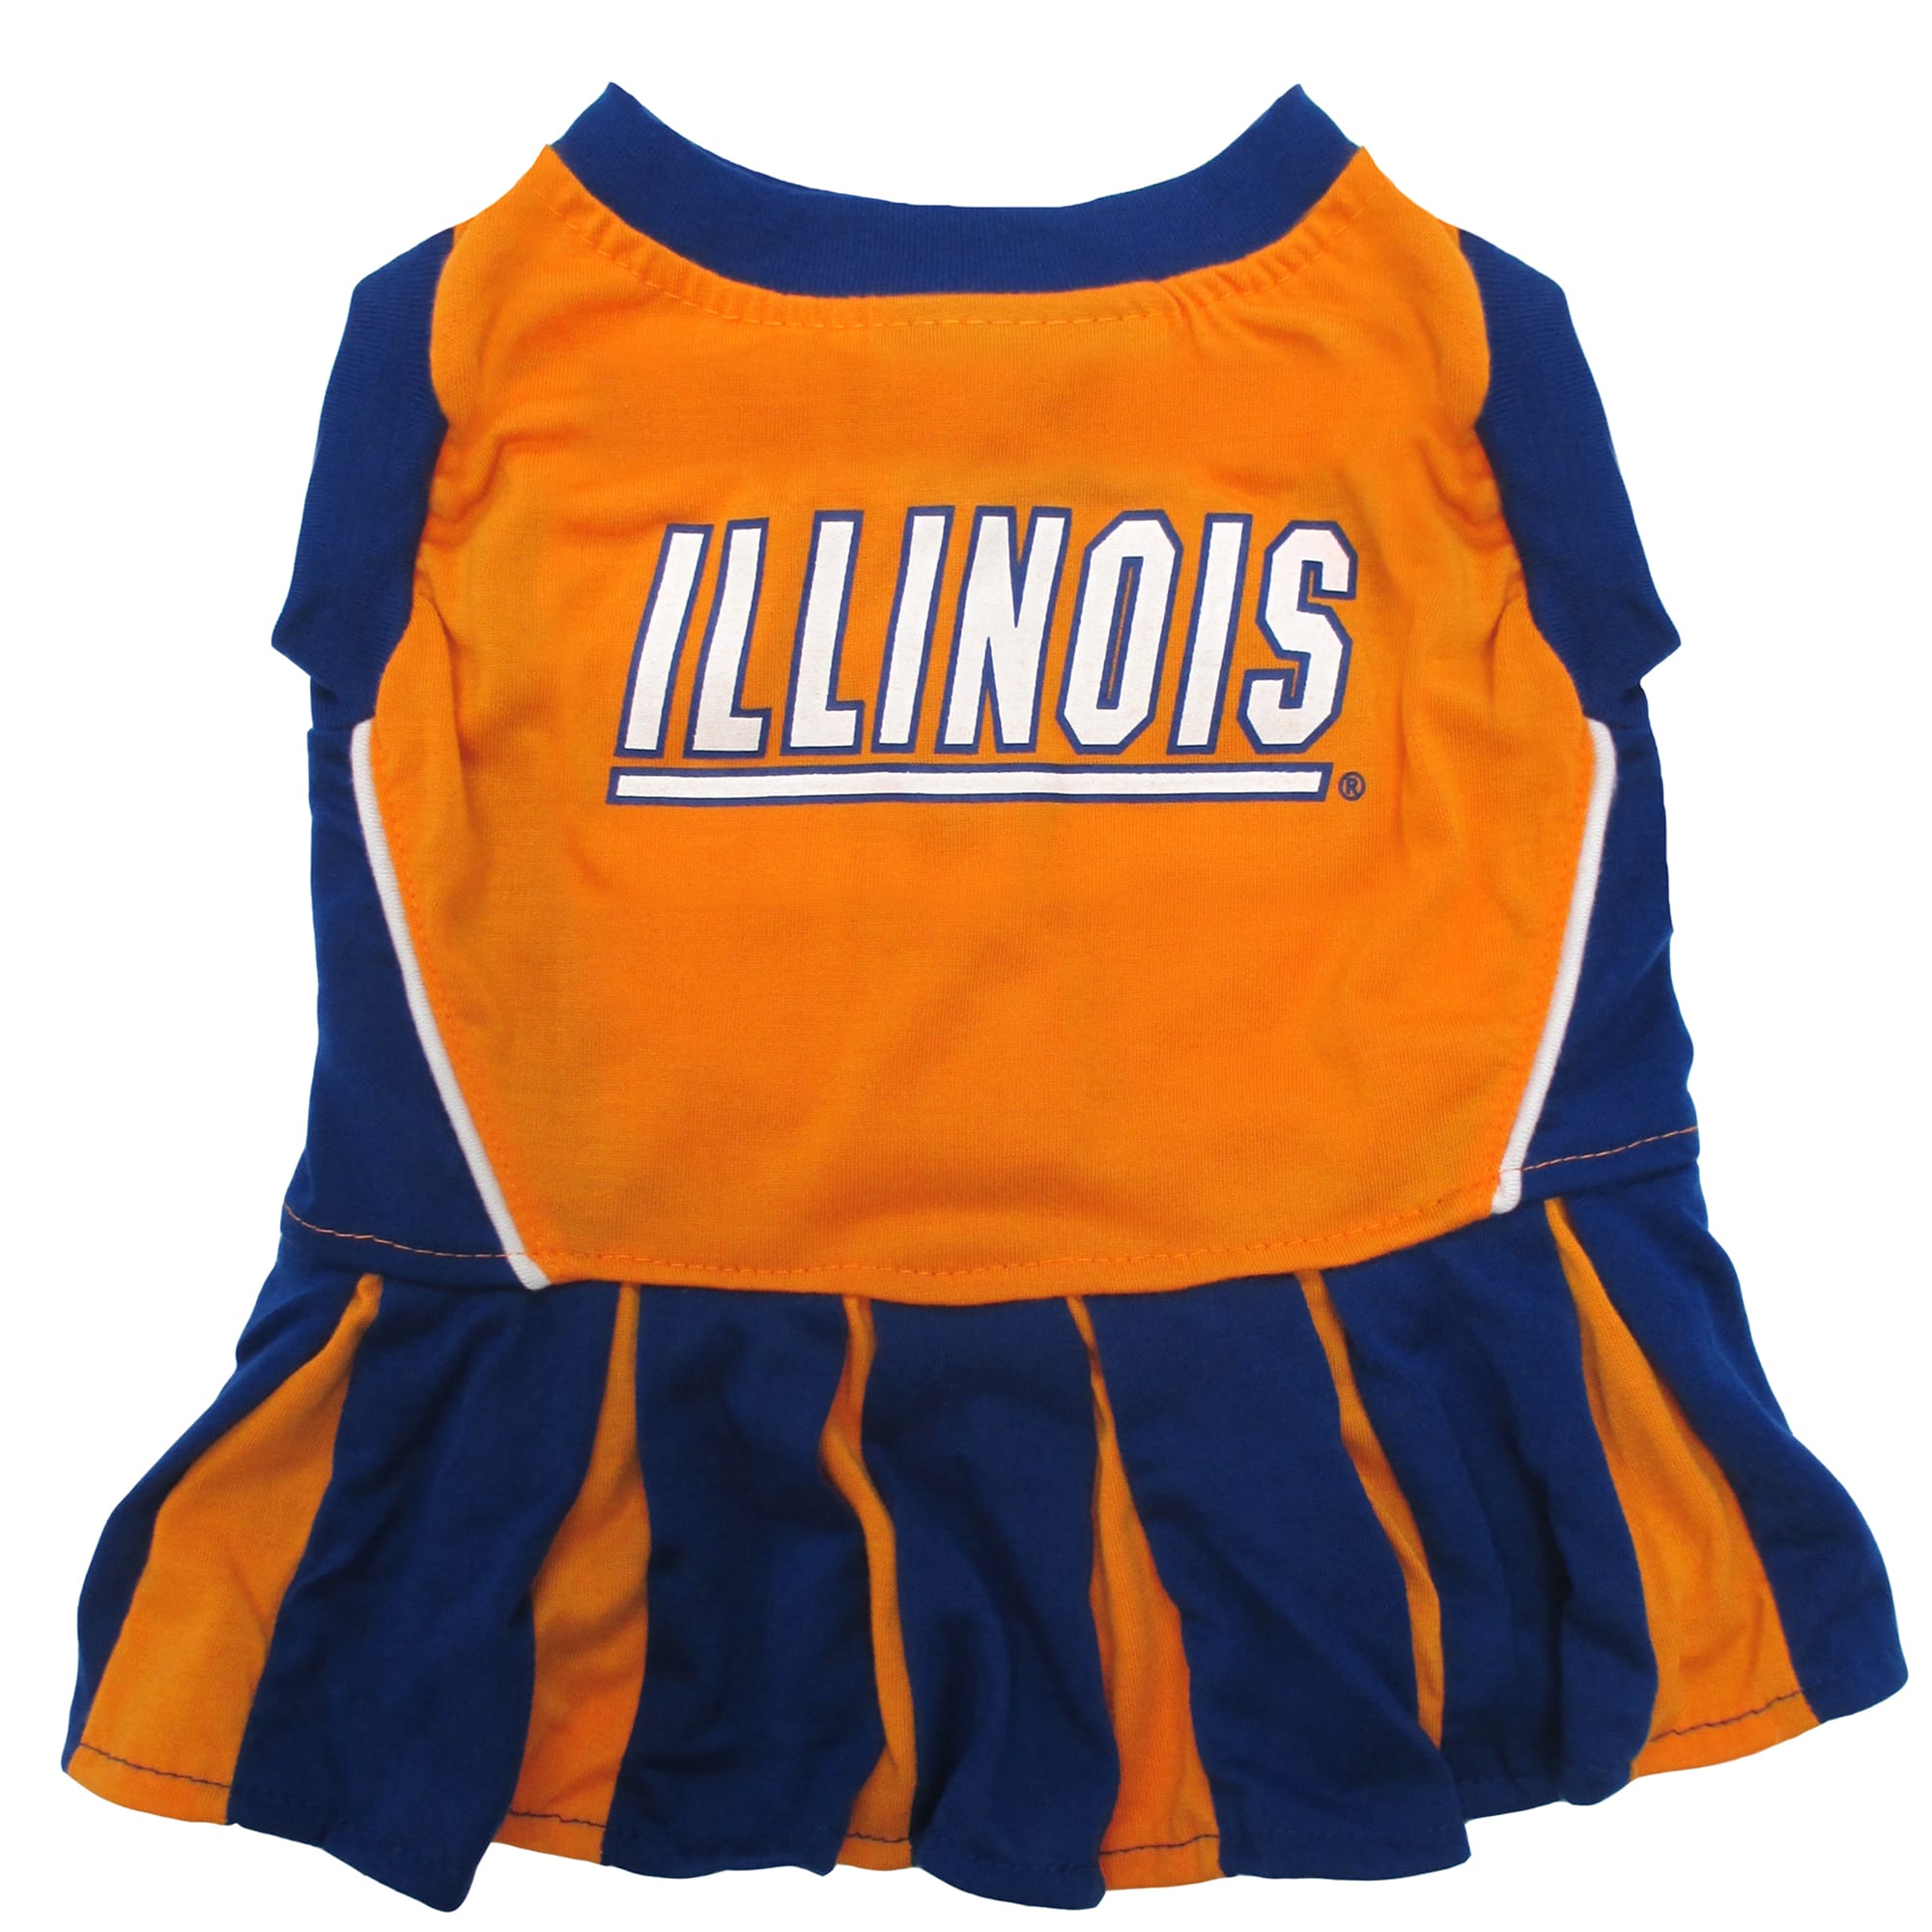 NWT University of Illinois Cheerleader Toddler 2 Piece Outfit Dress Embroidered 